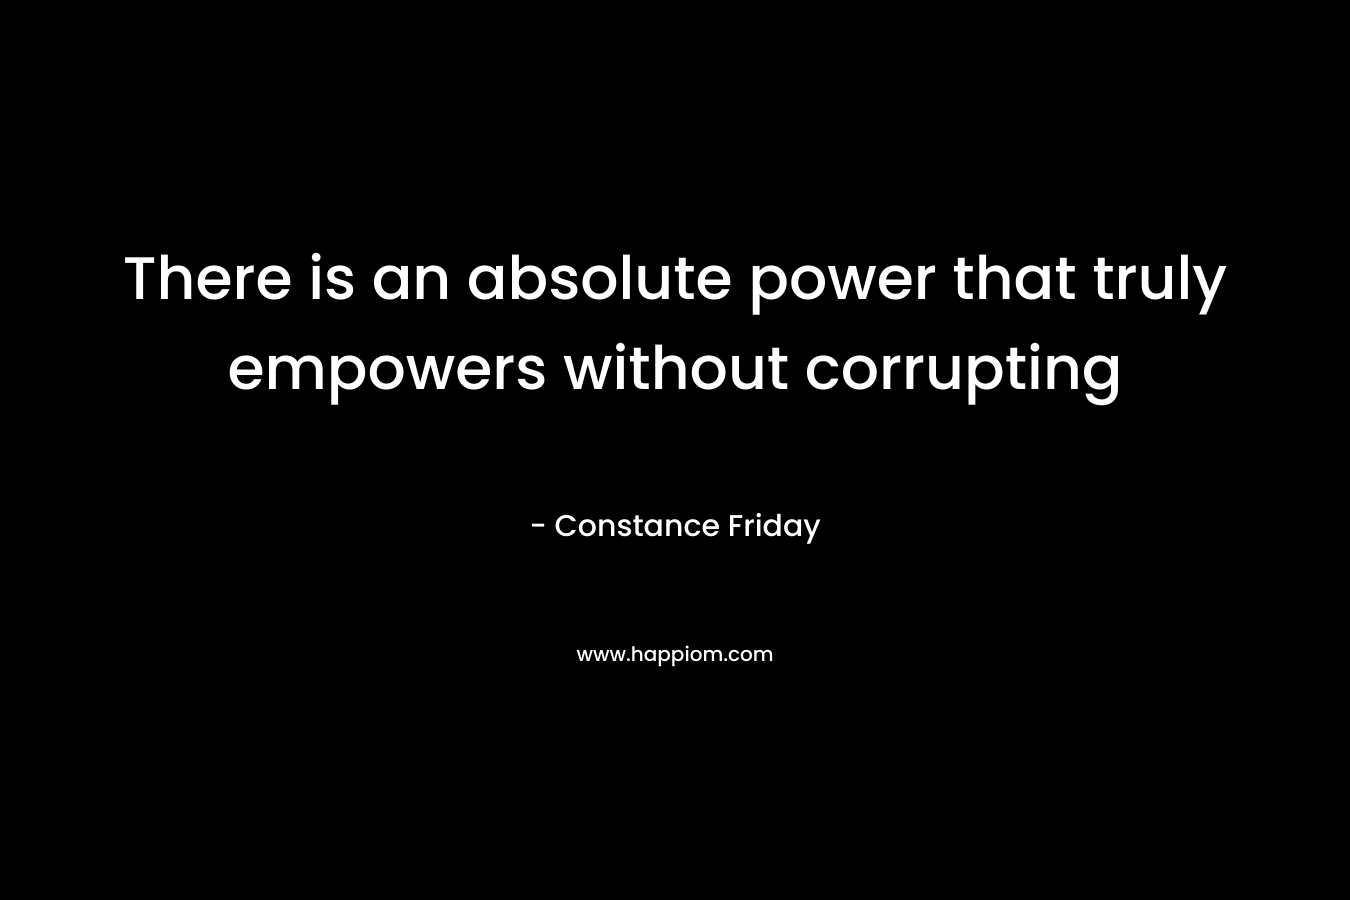 There is an absolute power that truly empowers without corrupting